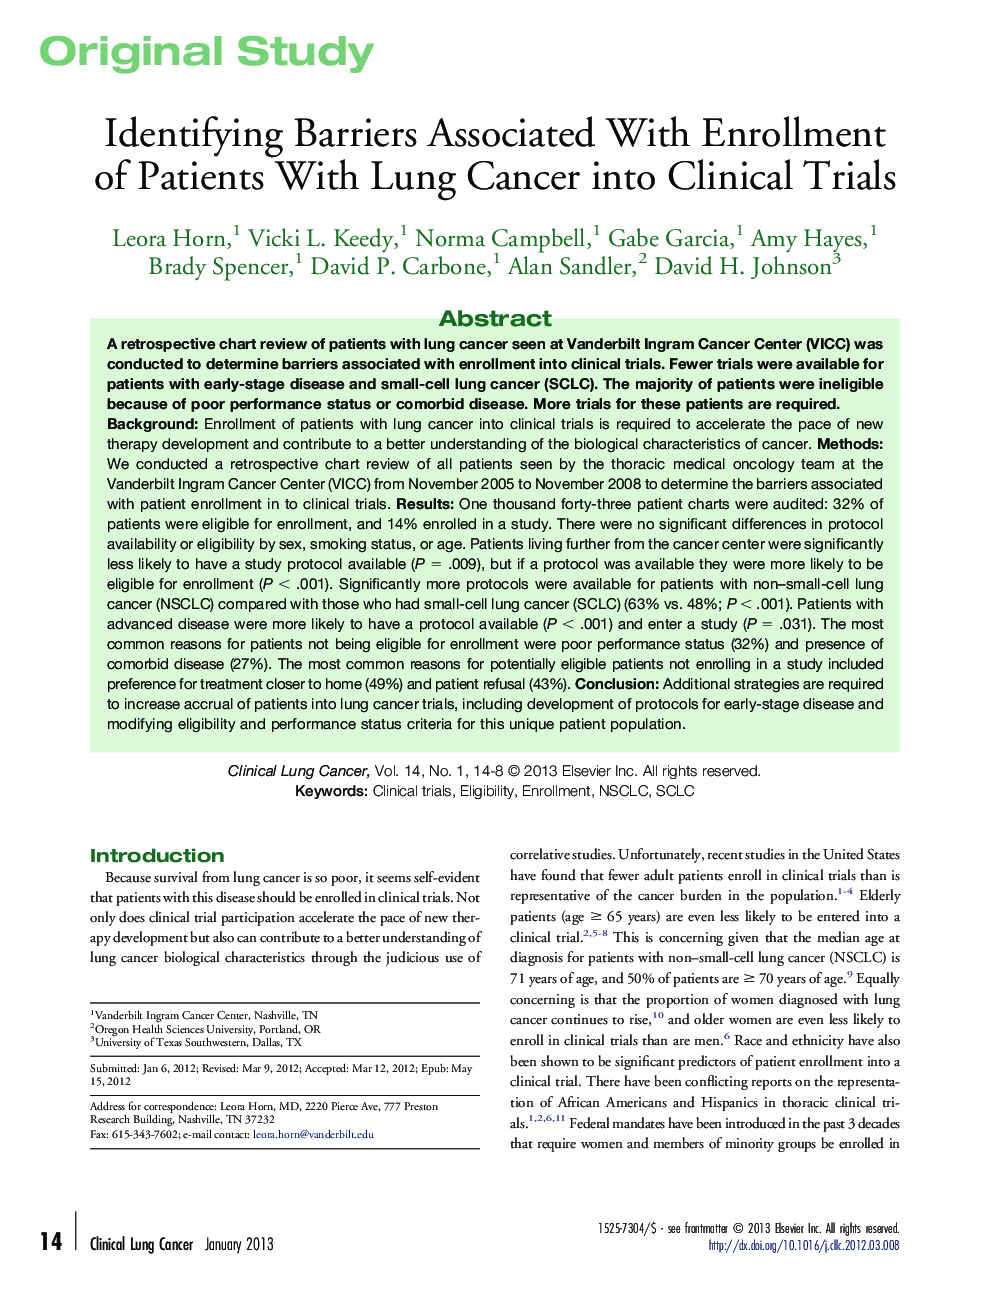 Identifying Barriers Associated With Enrollment of Patients With Lung Cancer into Clinical Trials